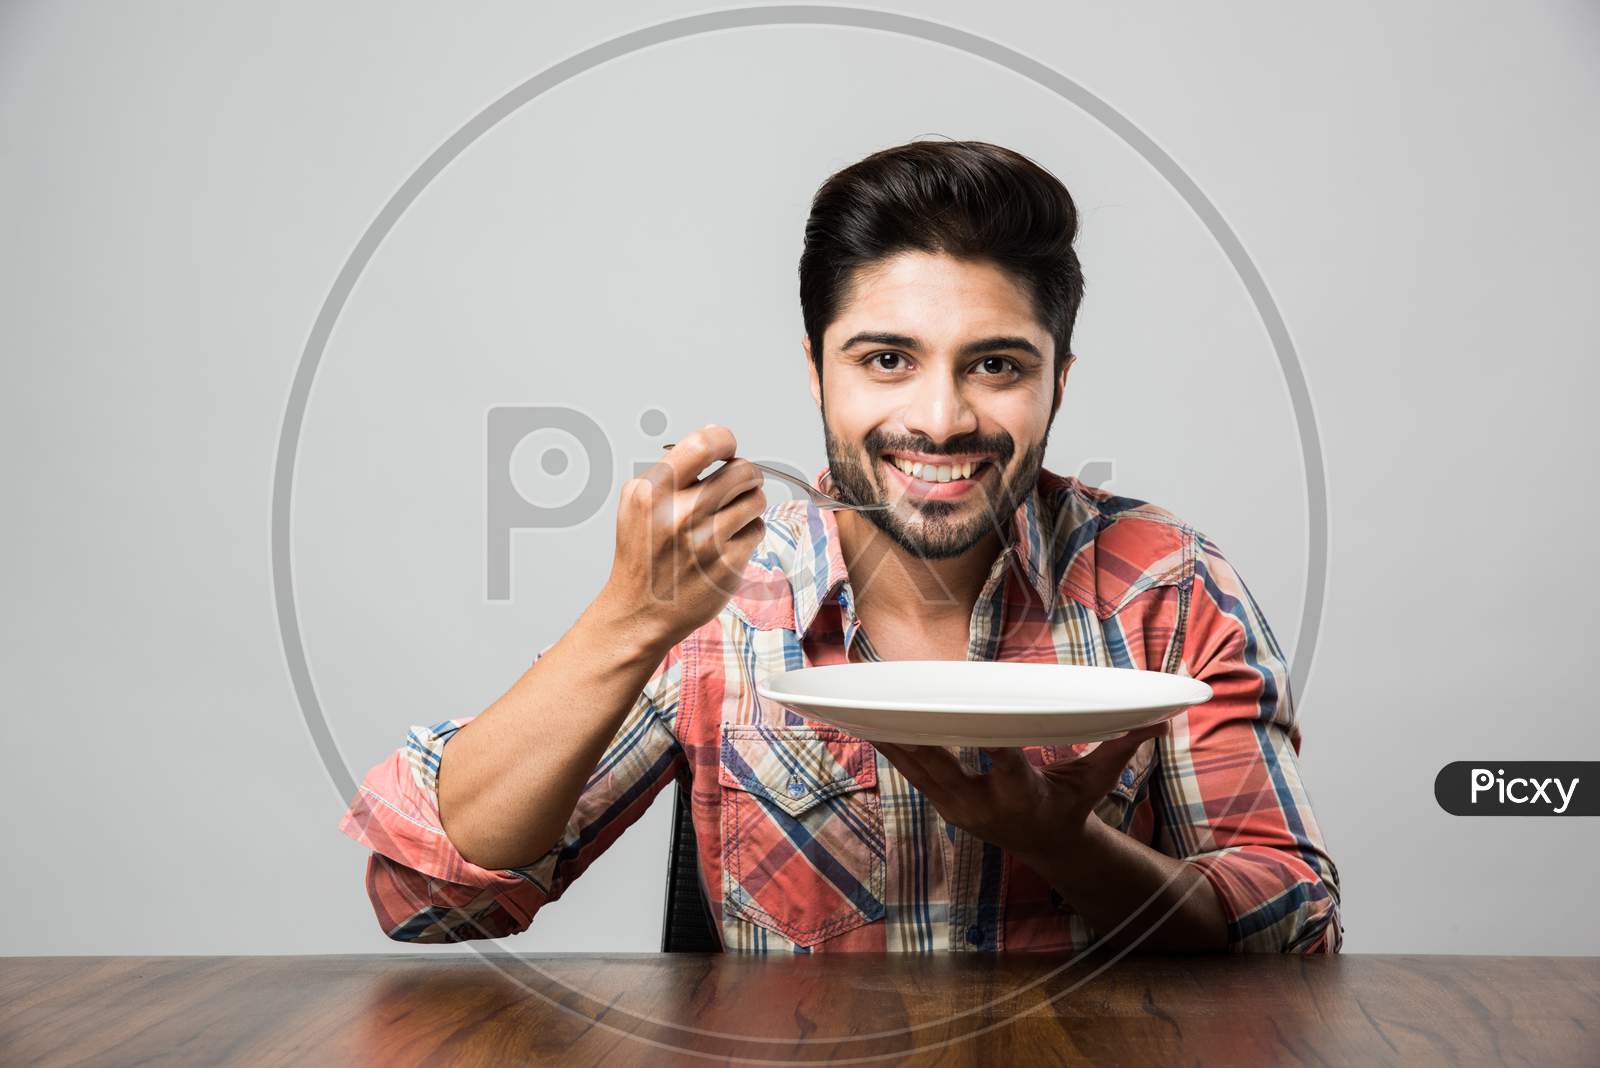 empty plate and Indian man with beard holding spoon and fork, wearing checkered shirt and sitting at table